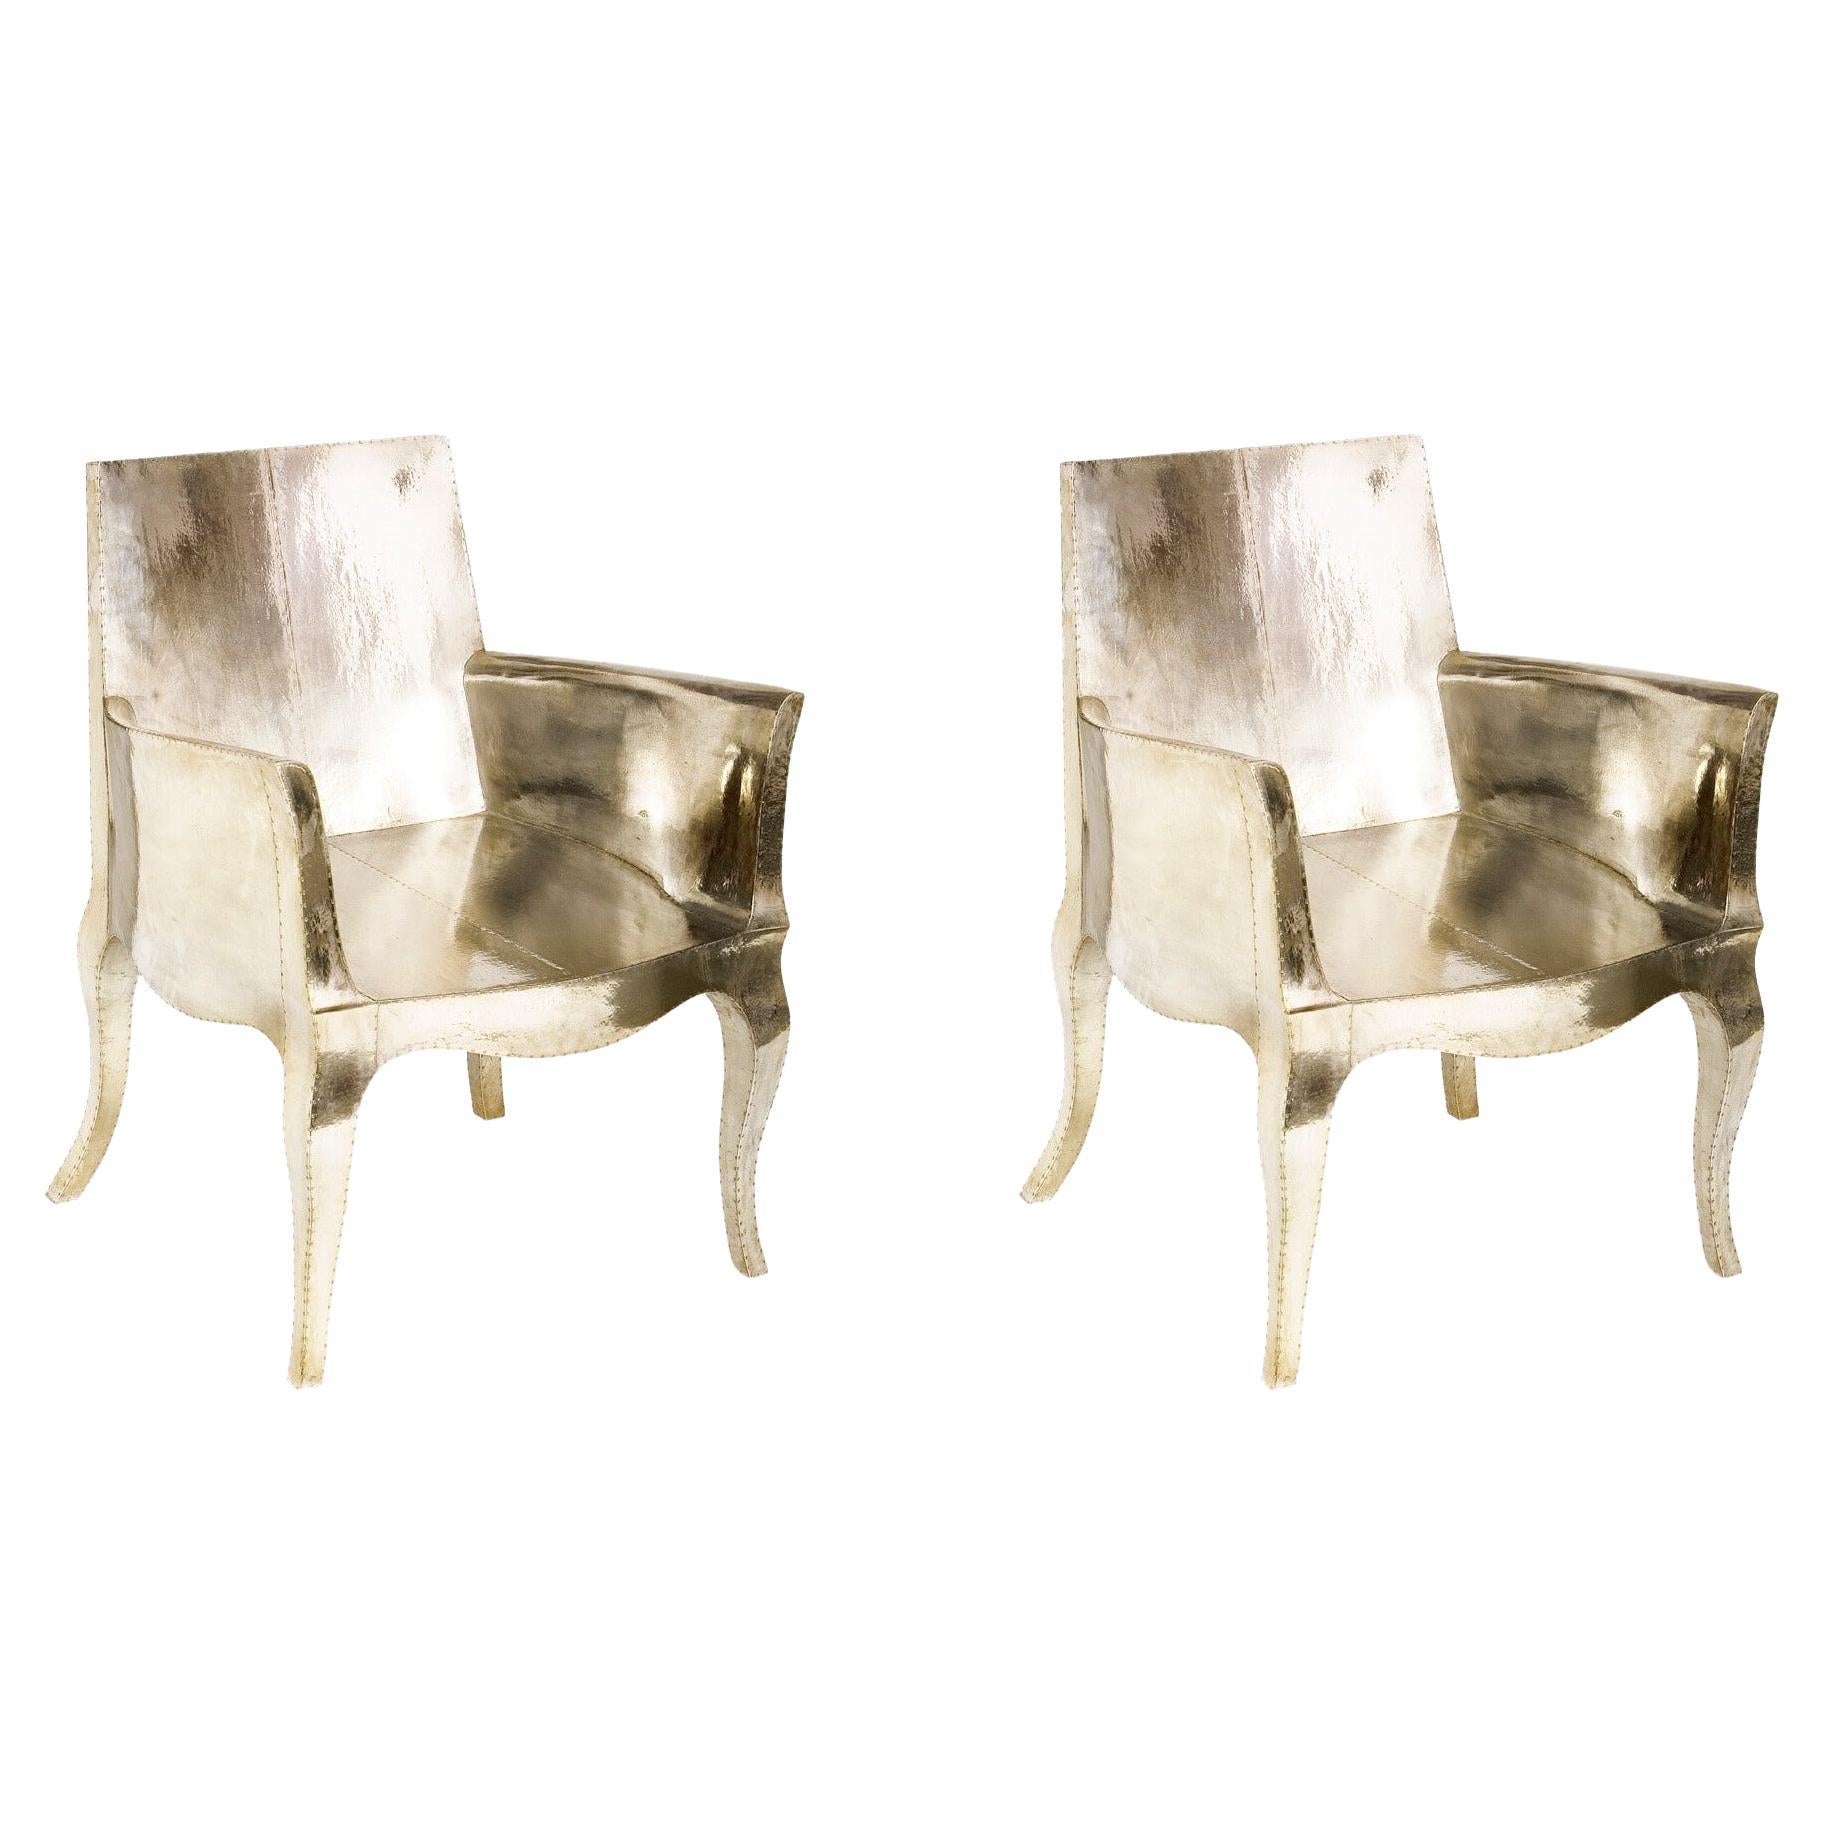 Art Nouveau Chairs Pair Designed by Paul Mathieu for Stephanie Odegard For Sale